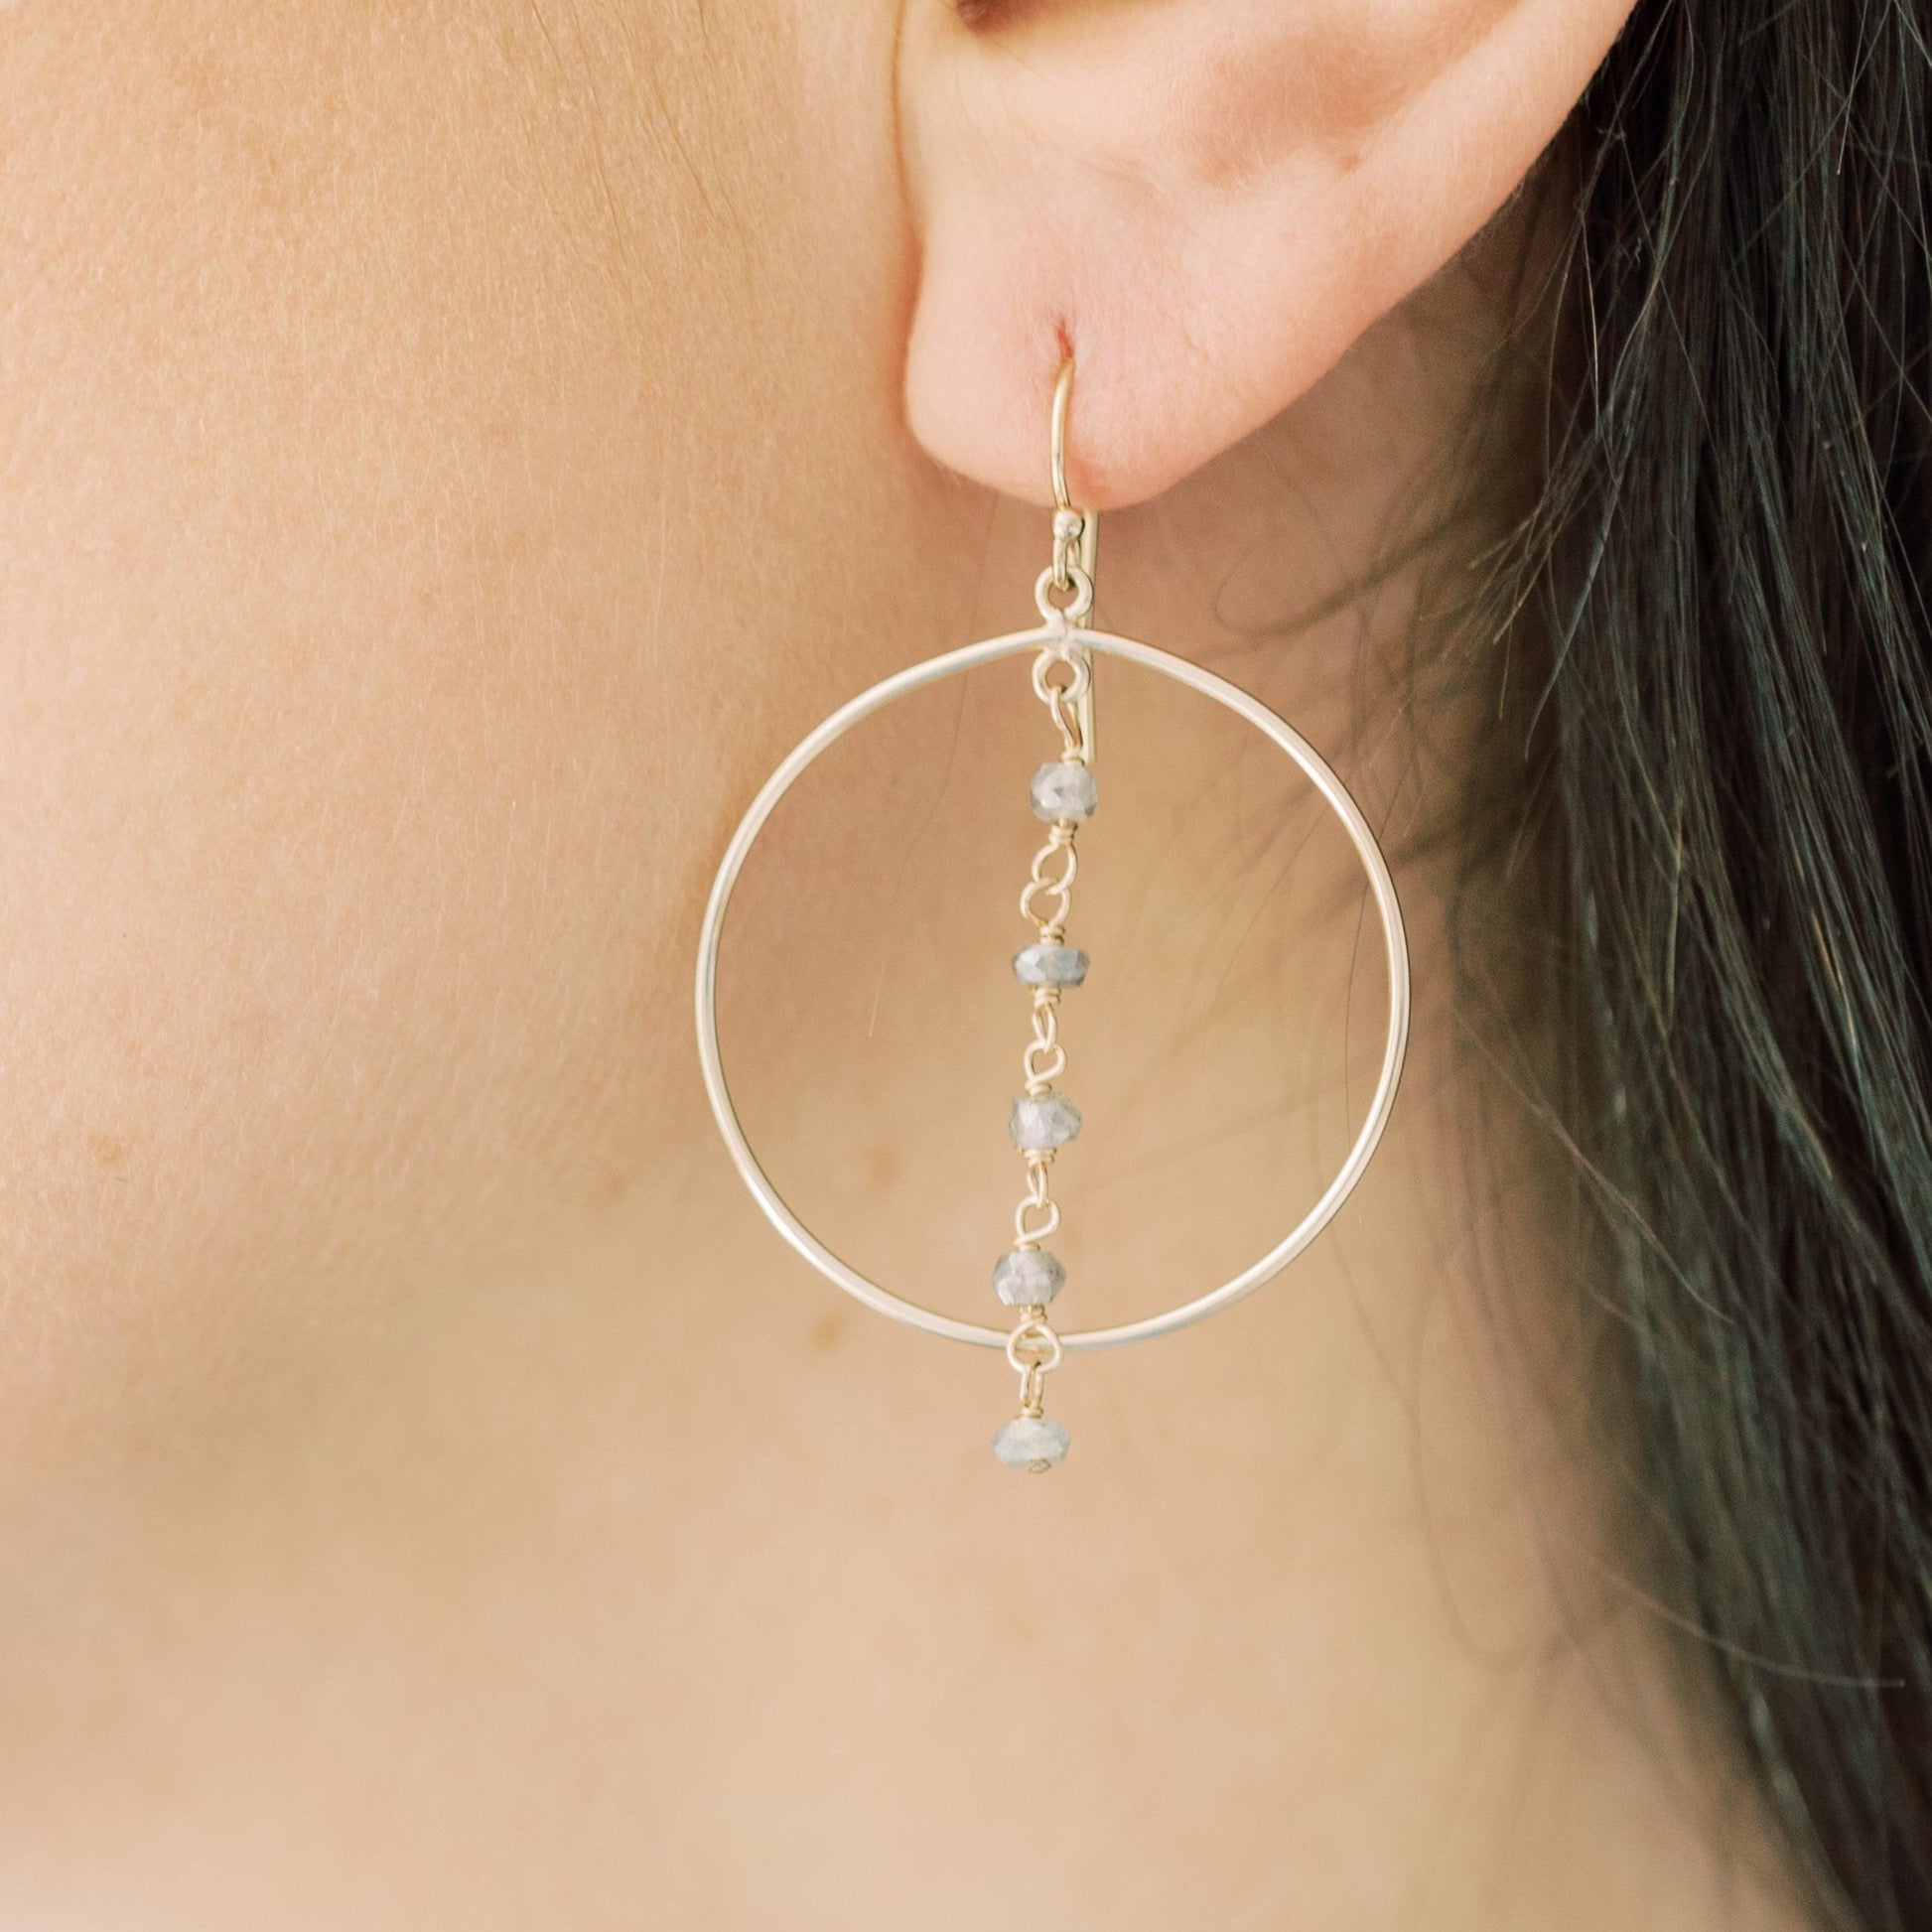 Gold Nantucket Earrings by Sarah Cornwell Jewelry. Woman's ear with sparkly statement gold hoop earrings with a strand of 5 wire wrapped labradorite gemstones down the middle.